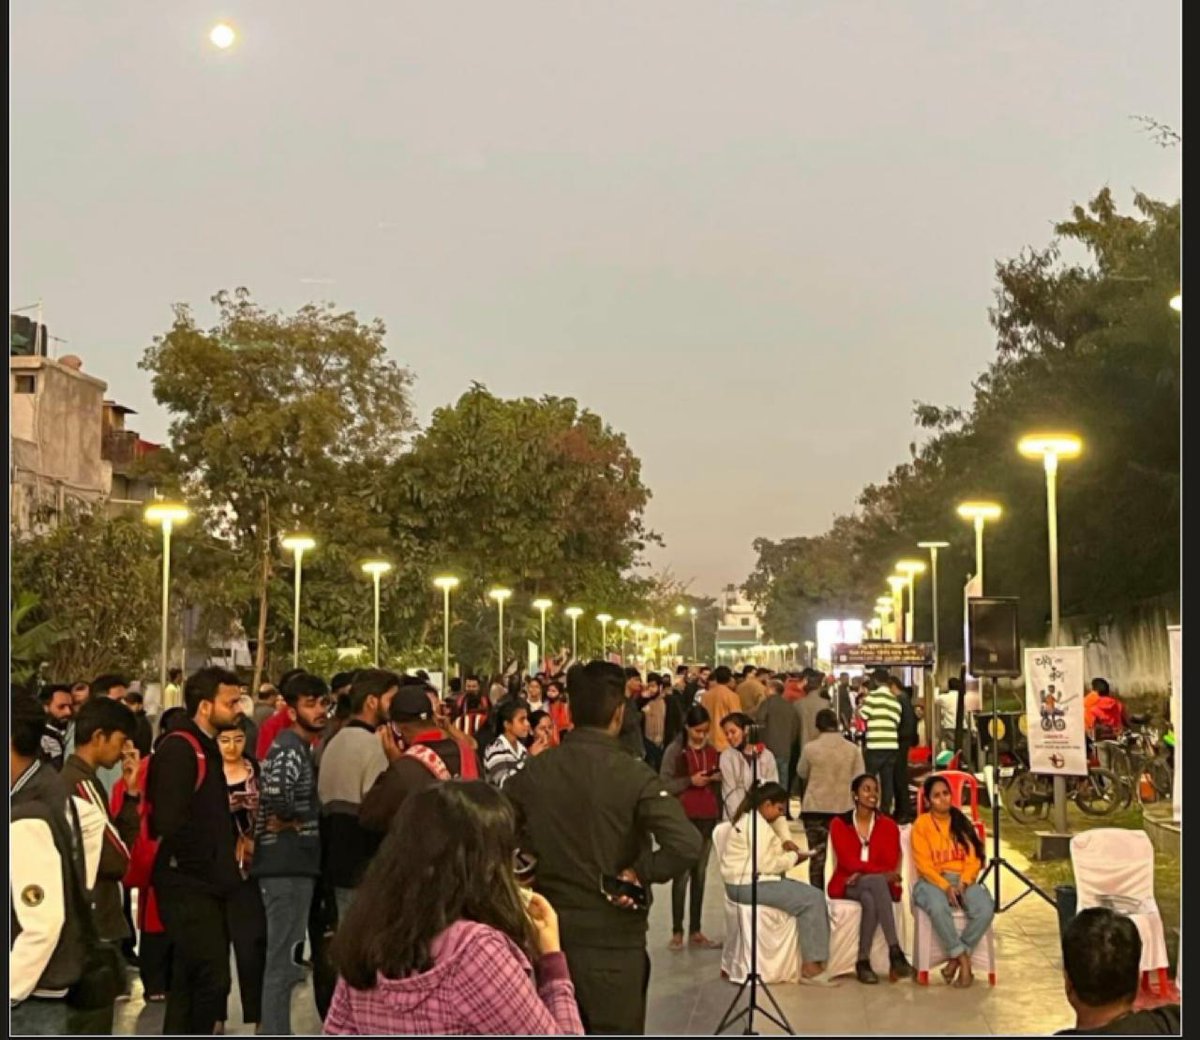 The energy at Chaikumbh is palpable as vendors showcase their finest teas and accessories. Spoiled for choice with so many delicious options!
#Chaikumbh